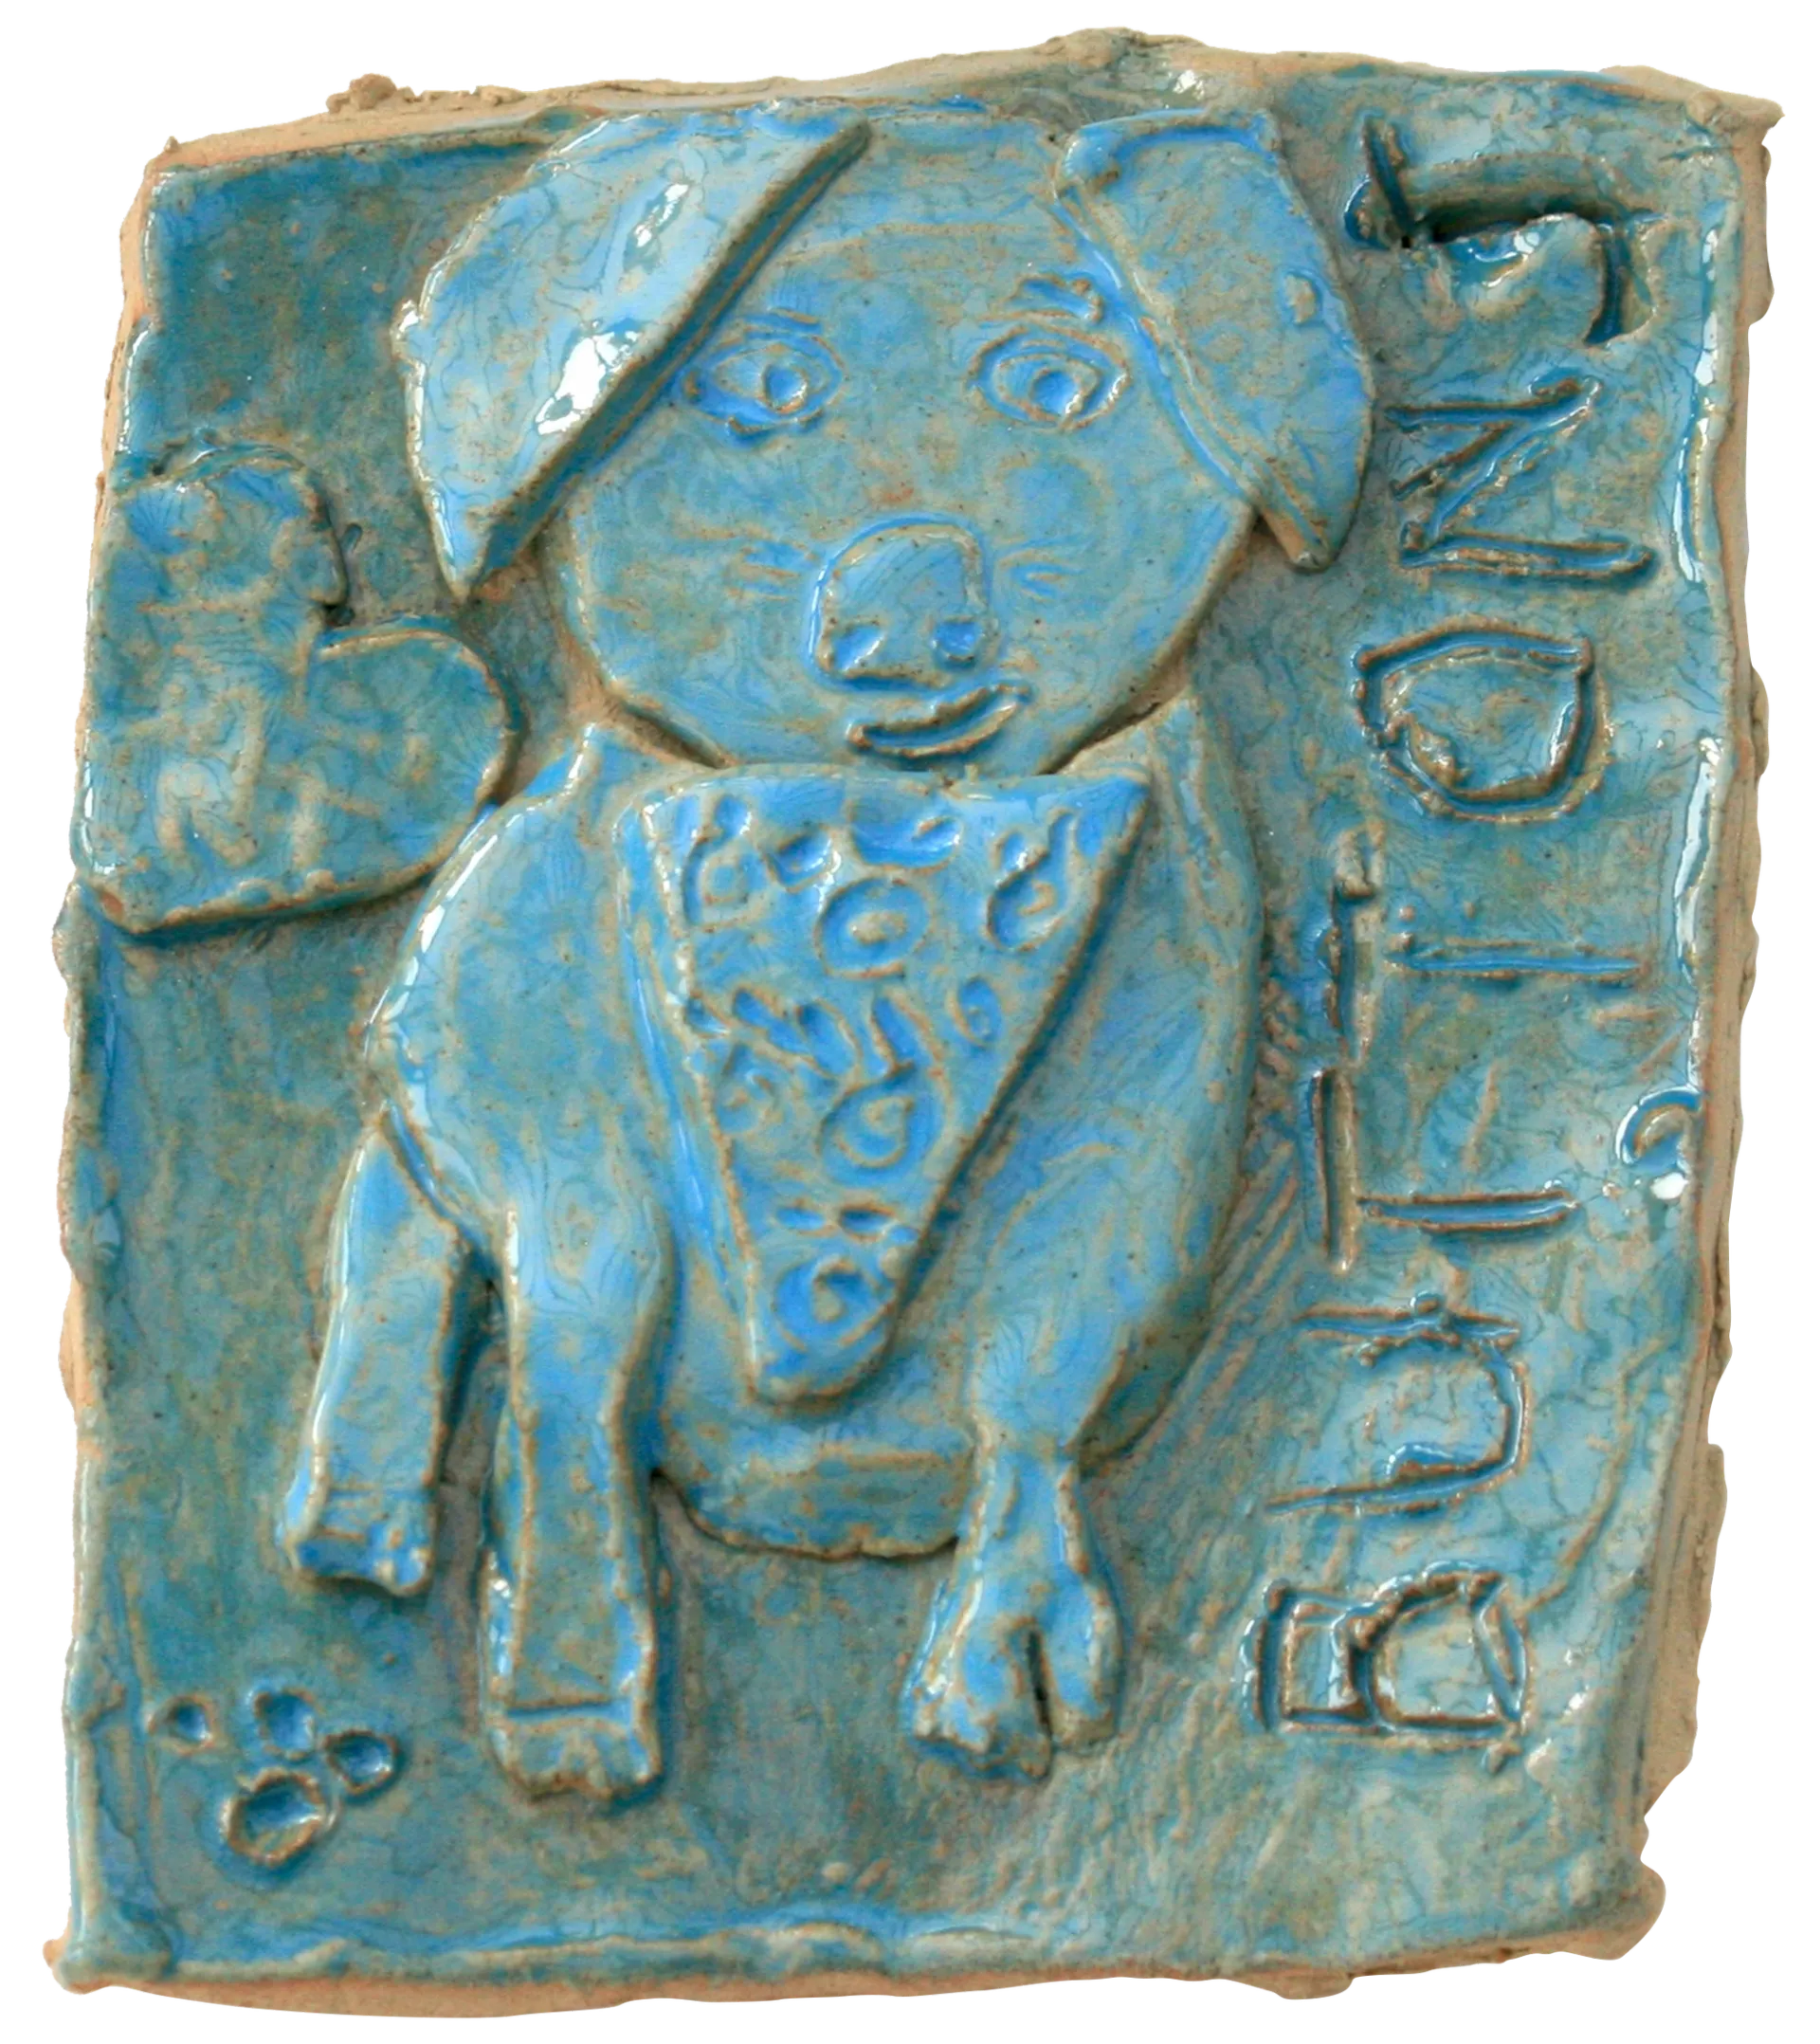 A blue glazed ceramic tile of Tasha’s pet dog, Buttons. Buttons is wearing a bandana around his neck, and a love heart has been added to the background on the left hand side of the tile